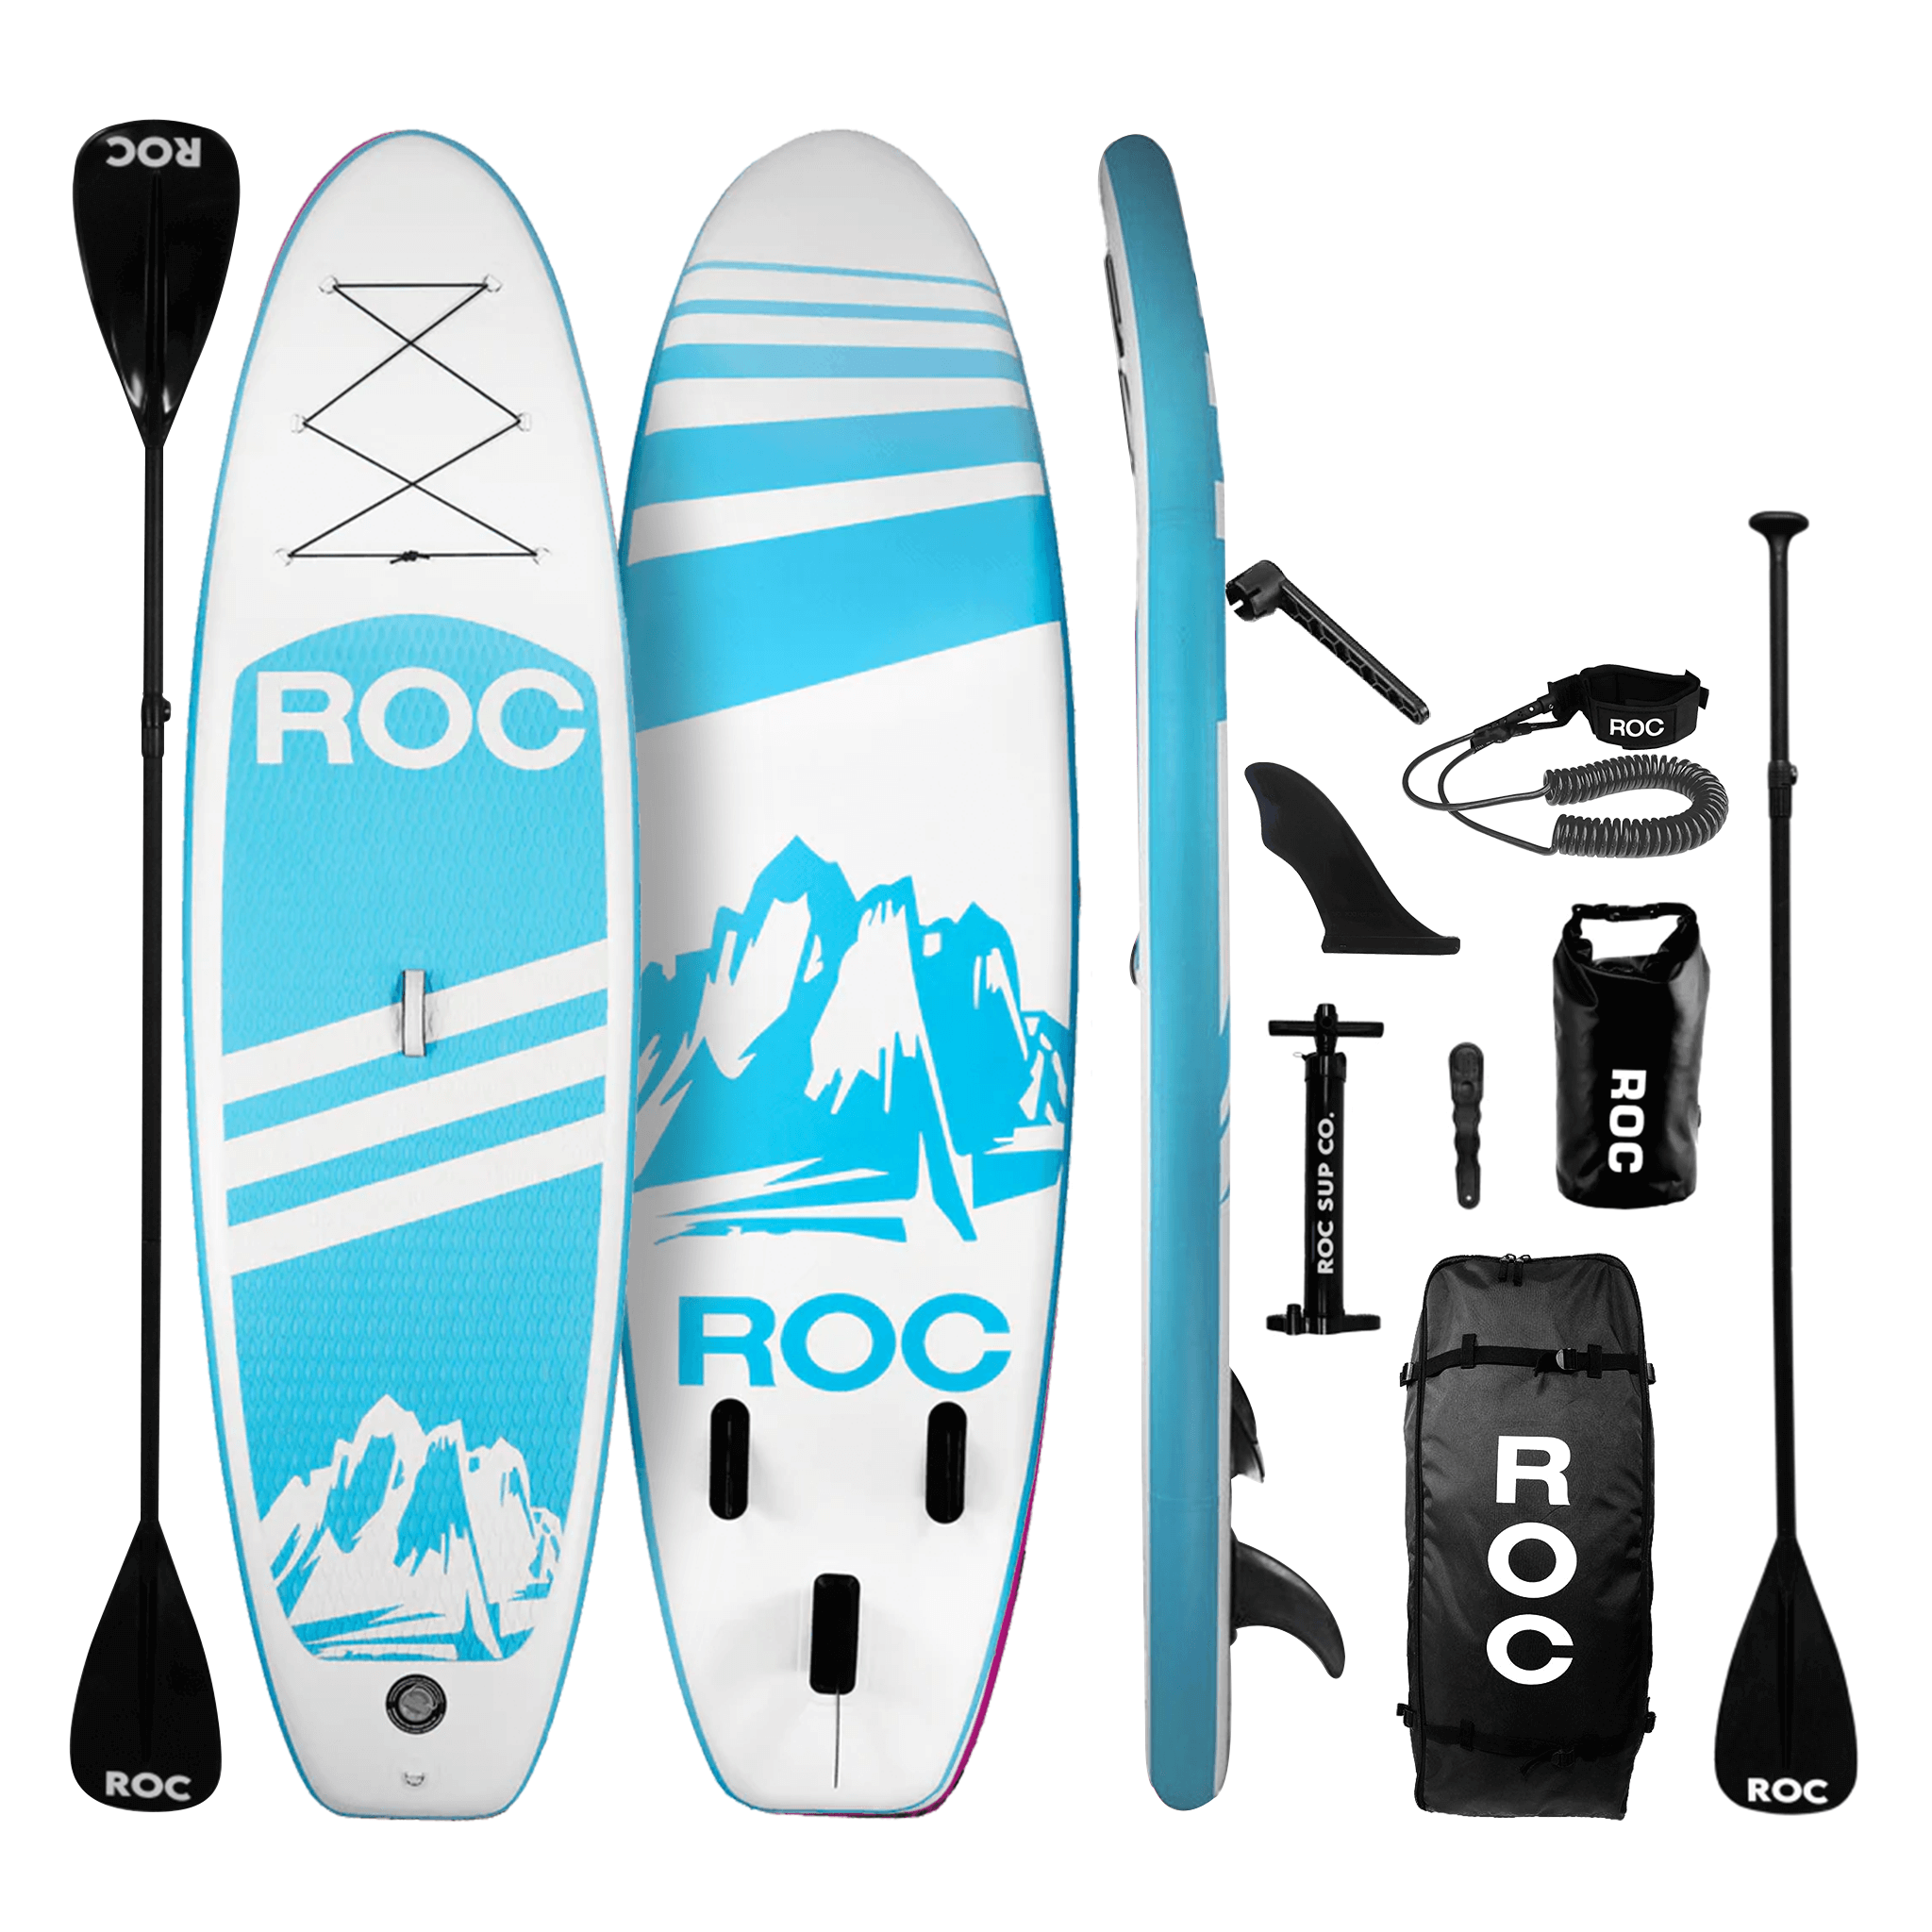 Inflatable ROC Paddle Paddle | Boards boards – Paddleboards ROC